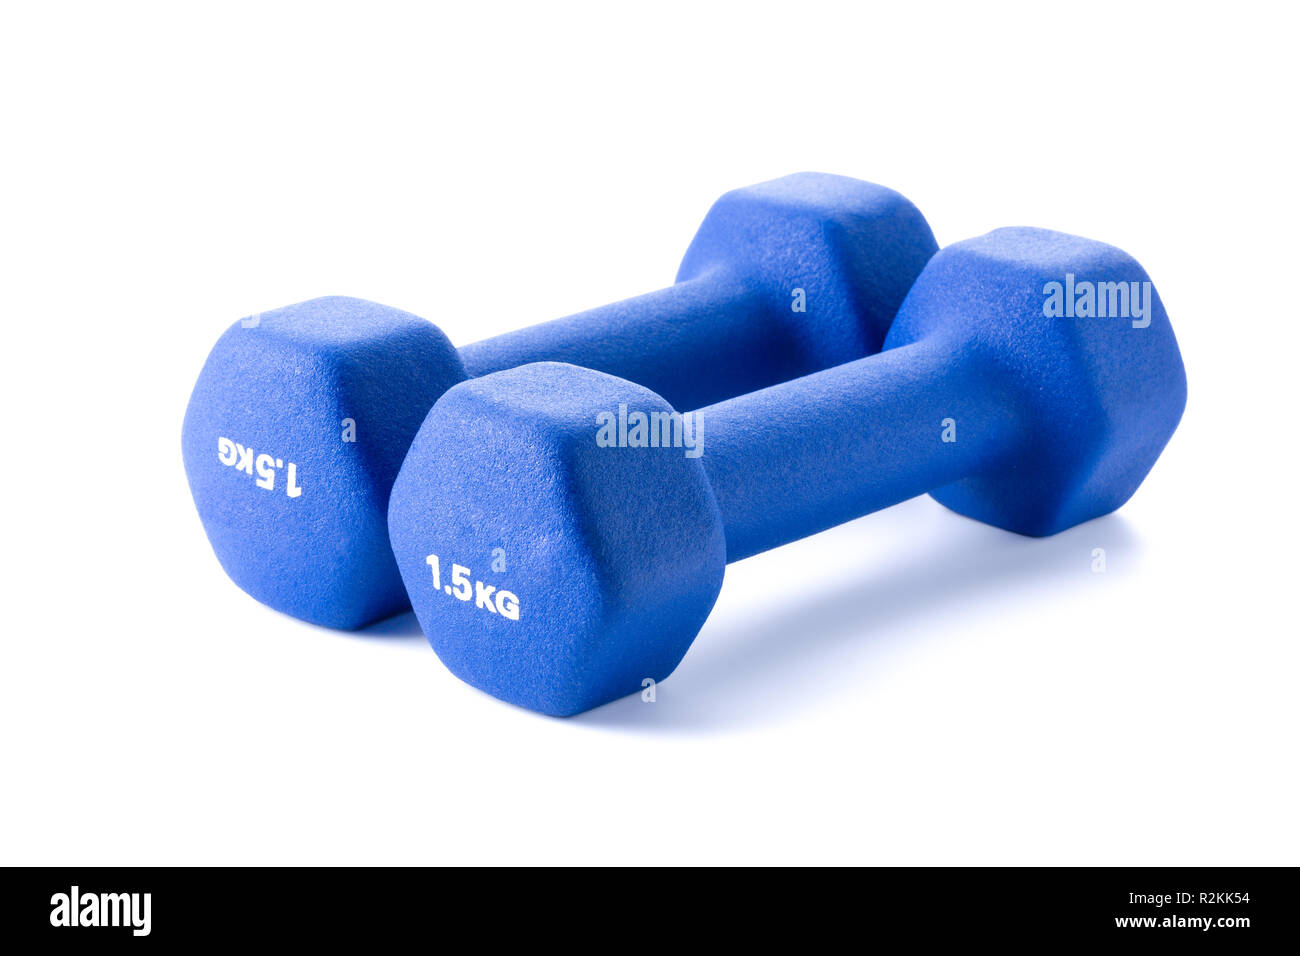 Two small blue dumbbells isolated on white background, Stock Photo